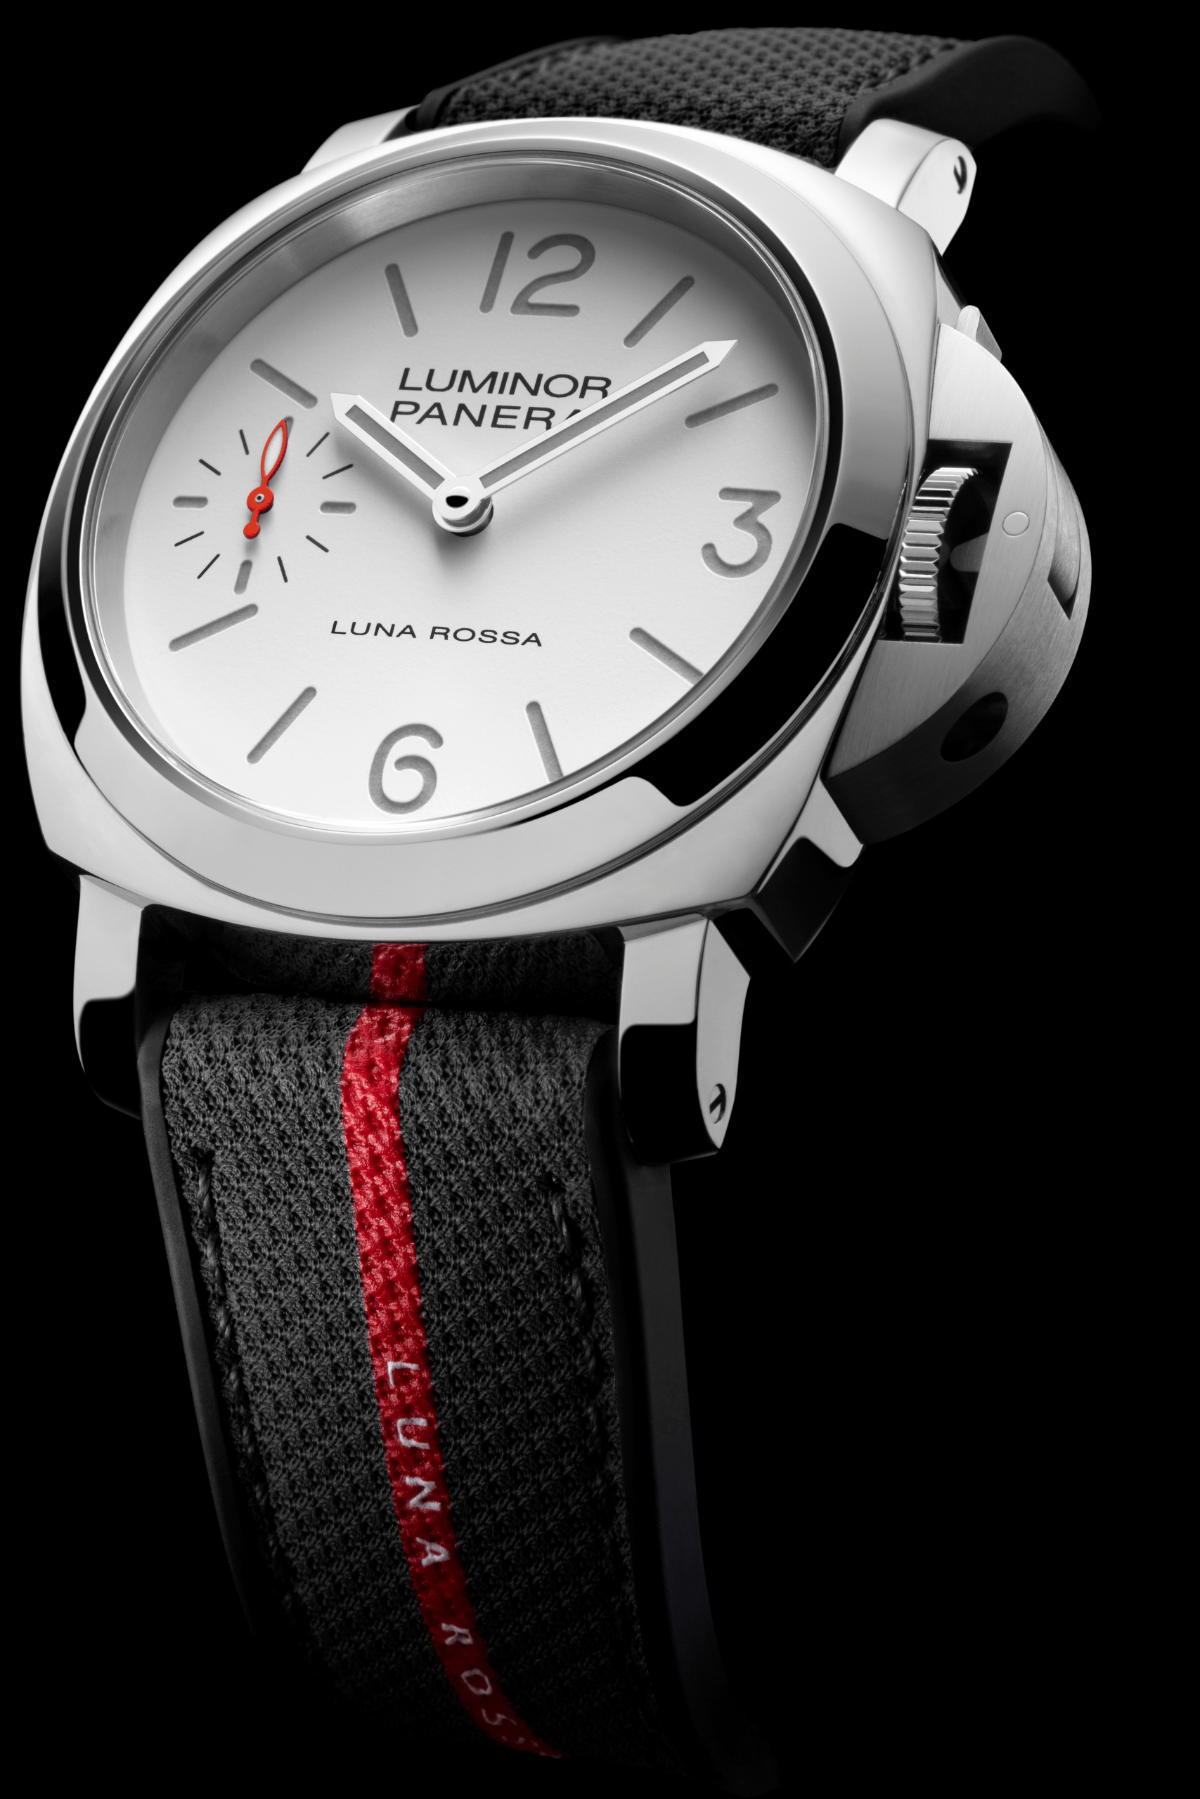 Panerai's Luminor Luna Rossa Watch: Collection Debuts A New Look